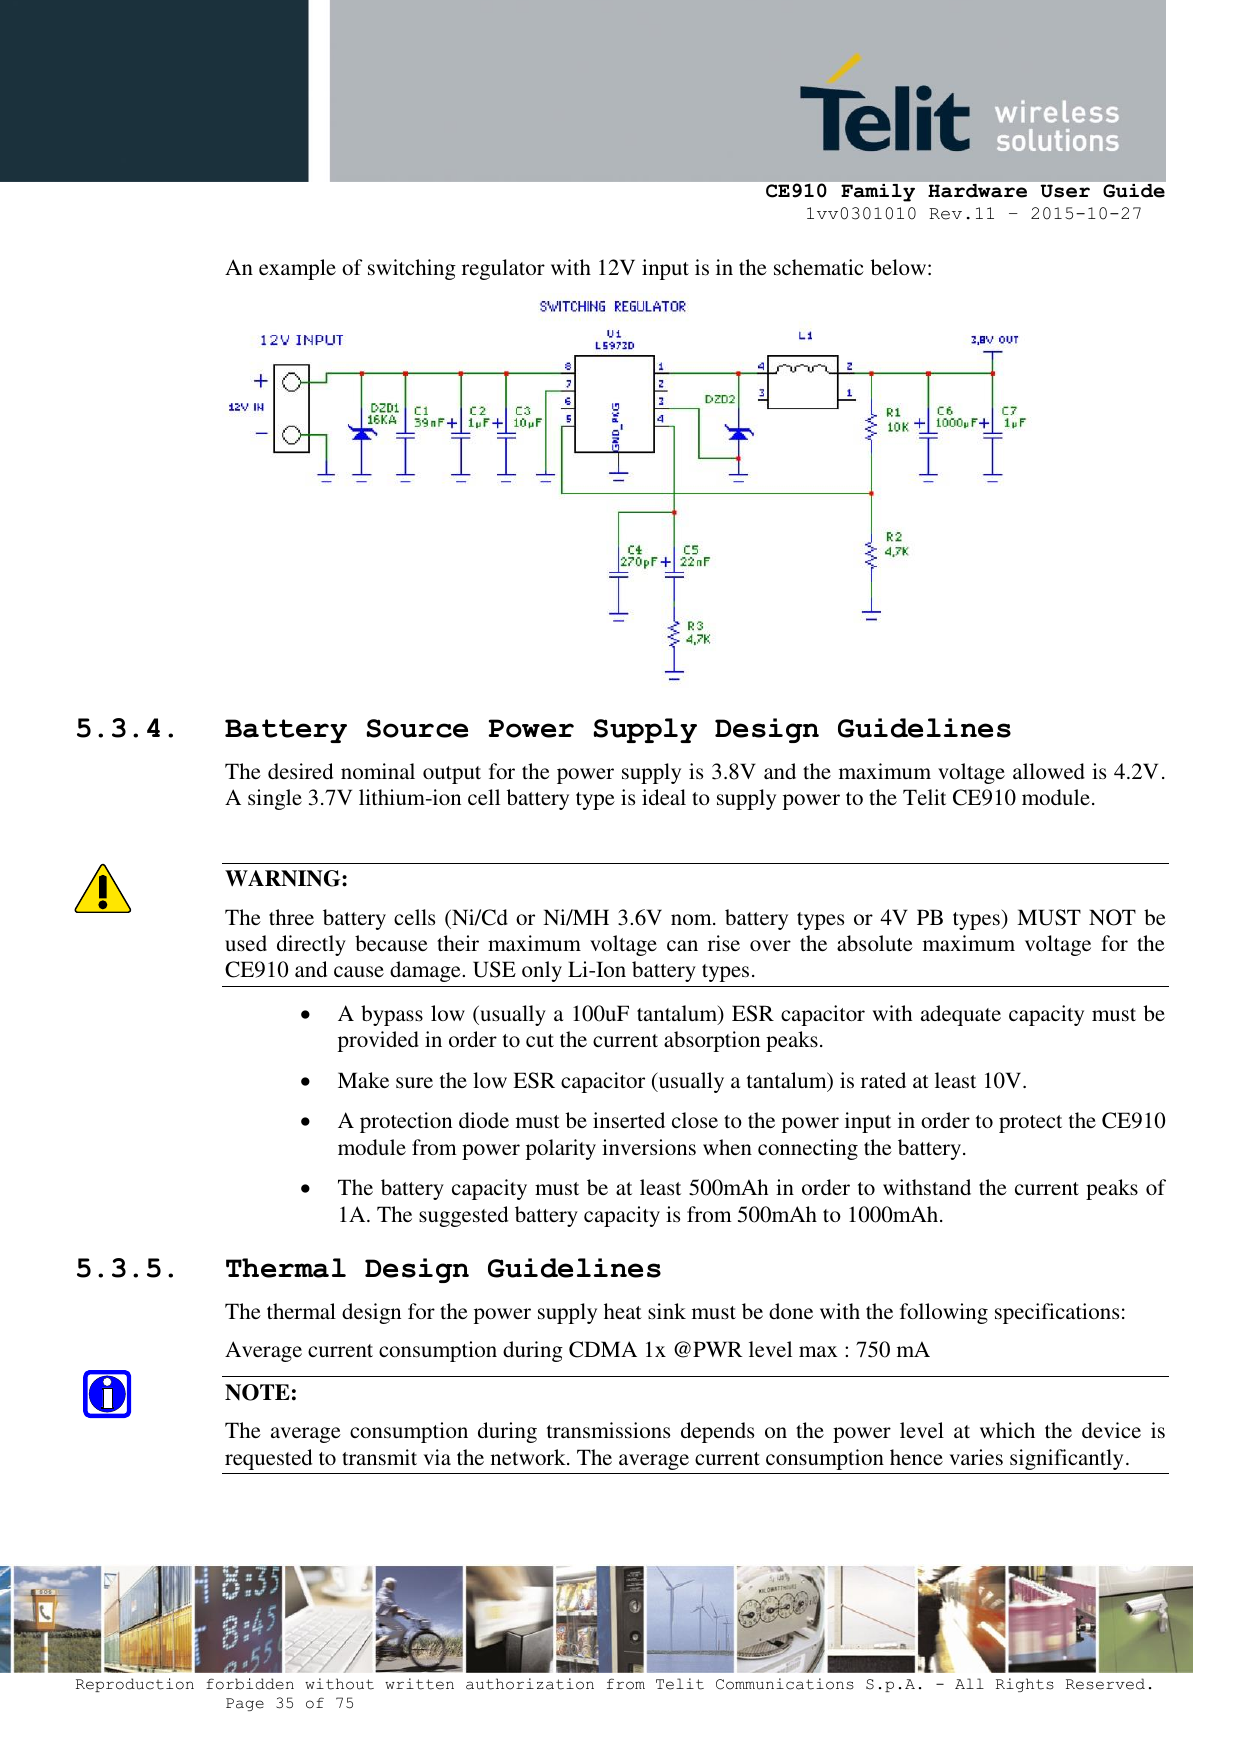     CE910 Family Hardware User Guide 1vv0301010 Rev.11 – 2015-10-27 Reproduction forbidden without written authorization from Telit Communications S.p.A. - All Rights Reserved.    Page 35 of 75                                                     An example of switching regulator with 12V input is in the schematic below:  5.3.4. Battery Source Power Supply Design Guidelines The desired nominal output for the power supply is 3.8V and the maximum voltage allowed is 4.2V. A single 3.7V lithium-ion cell battery type is ideal to supply power to the Telit CE910 module.  WARNING: The three battery cells (Ni/Cd or Ni/MH 3.6V nom. battery types or 4V PB types) MUST NOT be used  directly  because their maximum  voltage can  rise over  the absolute  maximum  voltage for  the CE910 and cause damage. USE only Li-Ion battery types.  A bypass low (usually a 100uF tantalum) ESR capacitor with adequate capacity must be provided in order to cut the current absorption peaks.   Make sure the low ESR capacitor (usually a tantalum) is rated at least 10V.   A protection diode must be inserted close to the power input in order to protect the CE910 module from power polarity inversions when connecting the battery.  The battery capacity must be at least 500mAh in order to withstand the current peaks of 1A. The suggested battery capacity is from 500mAh to 1000mAh. 5.3.5. Thermal Design Guidelines The thermal design for the power supply heat sink must be done with the following specifications: Average current consumption during CDMA 1x @PWR level max : 750 mA NOTE: The average consumption during transmissions depends on the  power level at which  the device is requested to transmit via the network. The average current consumption hence varies significantly. 